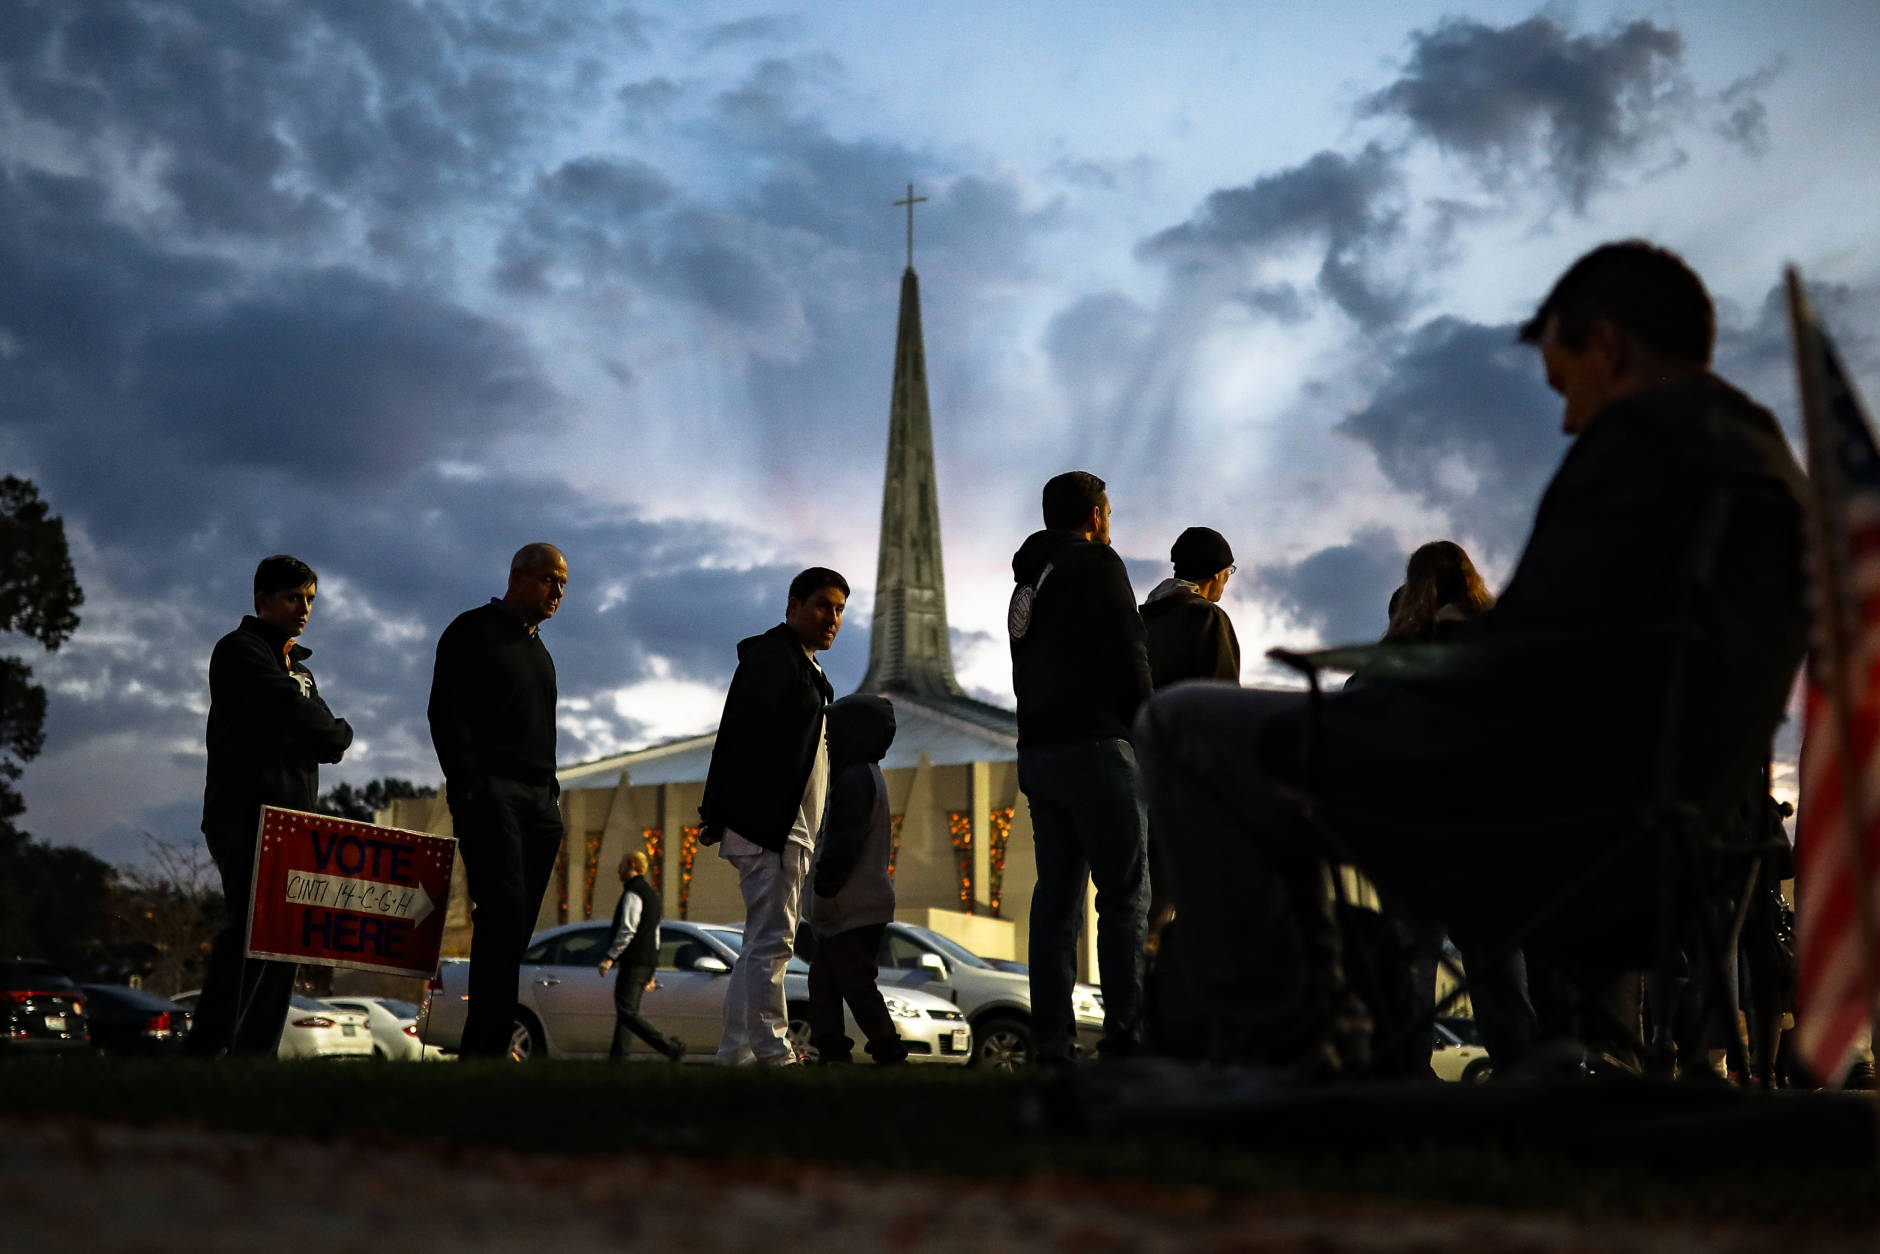 Adam Fohlen, his son Ari, center left, and others, wait in line outside a polling place at the Nativity School as a poll watcher sits nearby, Tuesday, Nov. 8, 2016, in Cincinnati. (AP Photo/John Minchillo)